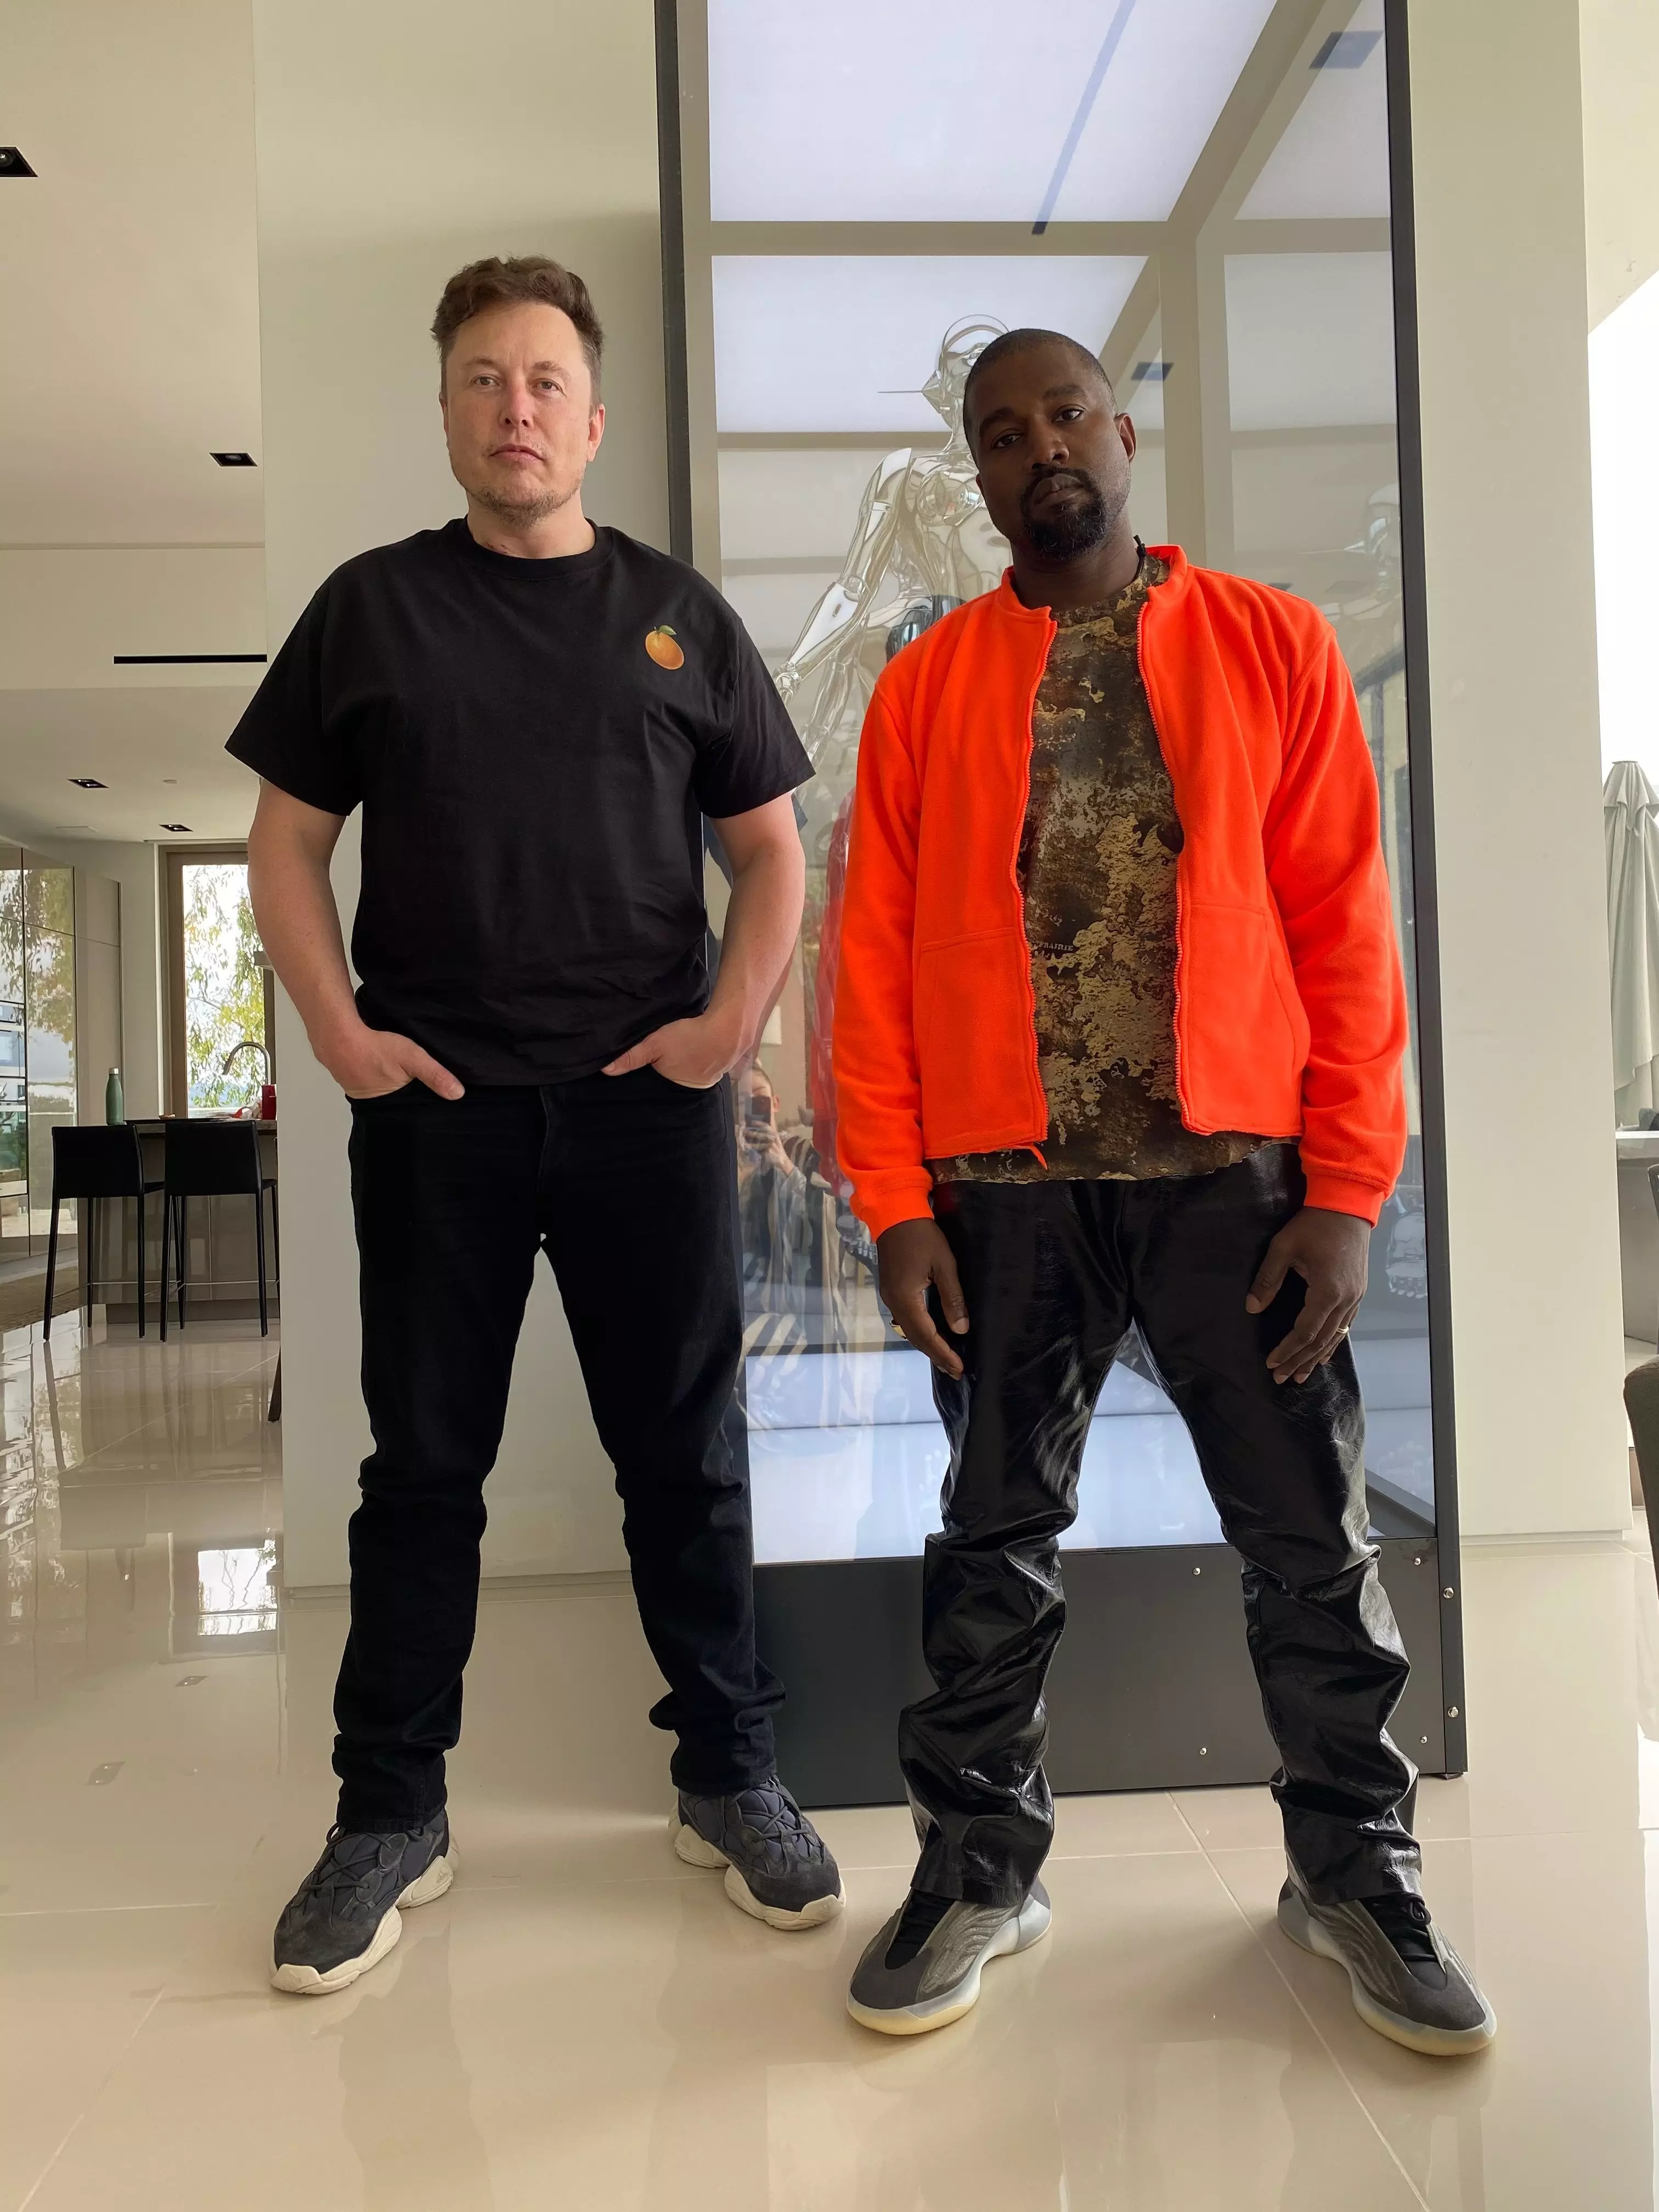 Elon Musk has said Kanye has his 'full support'.